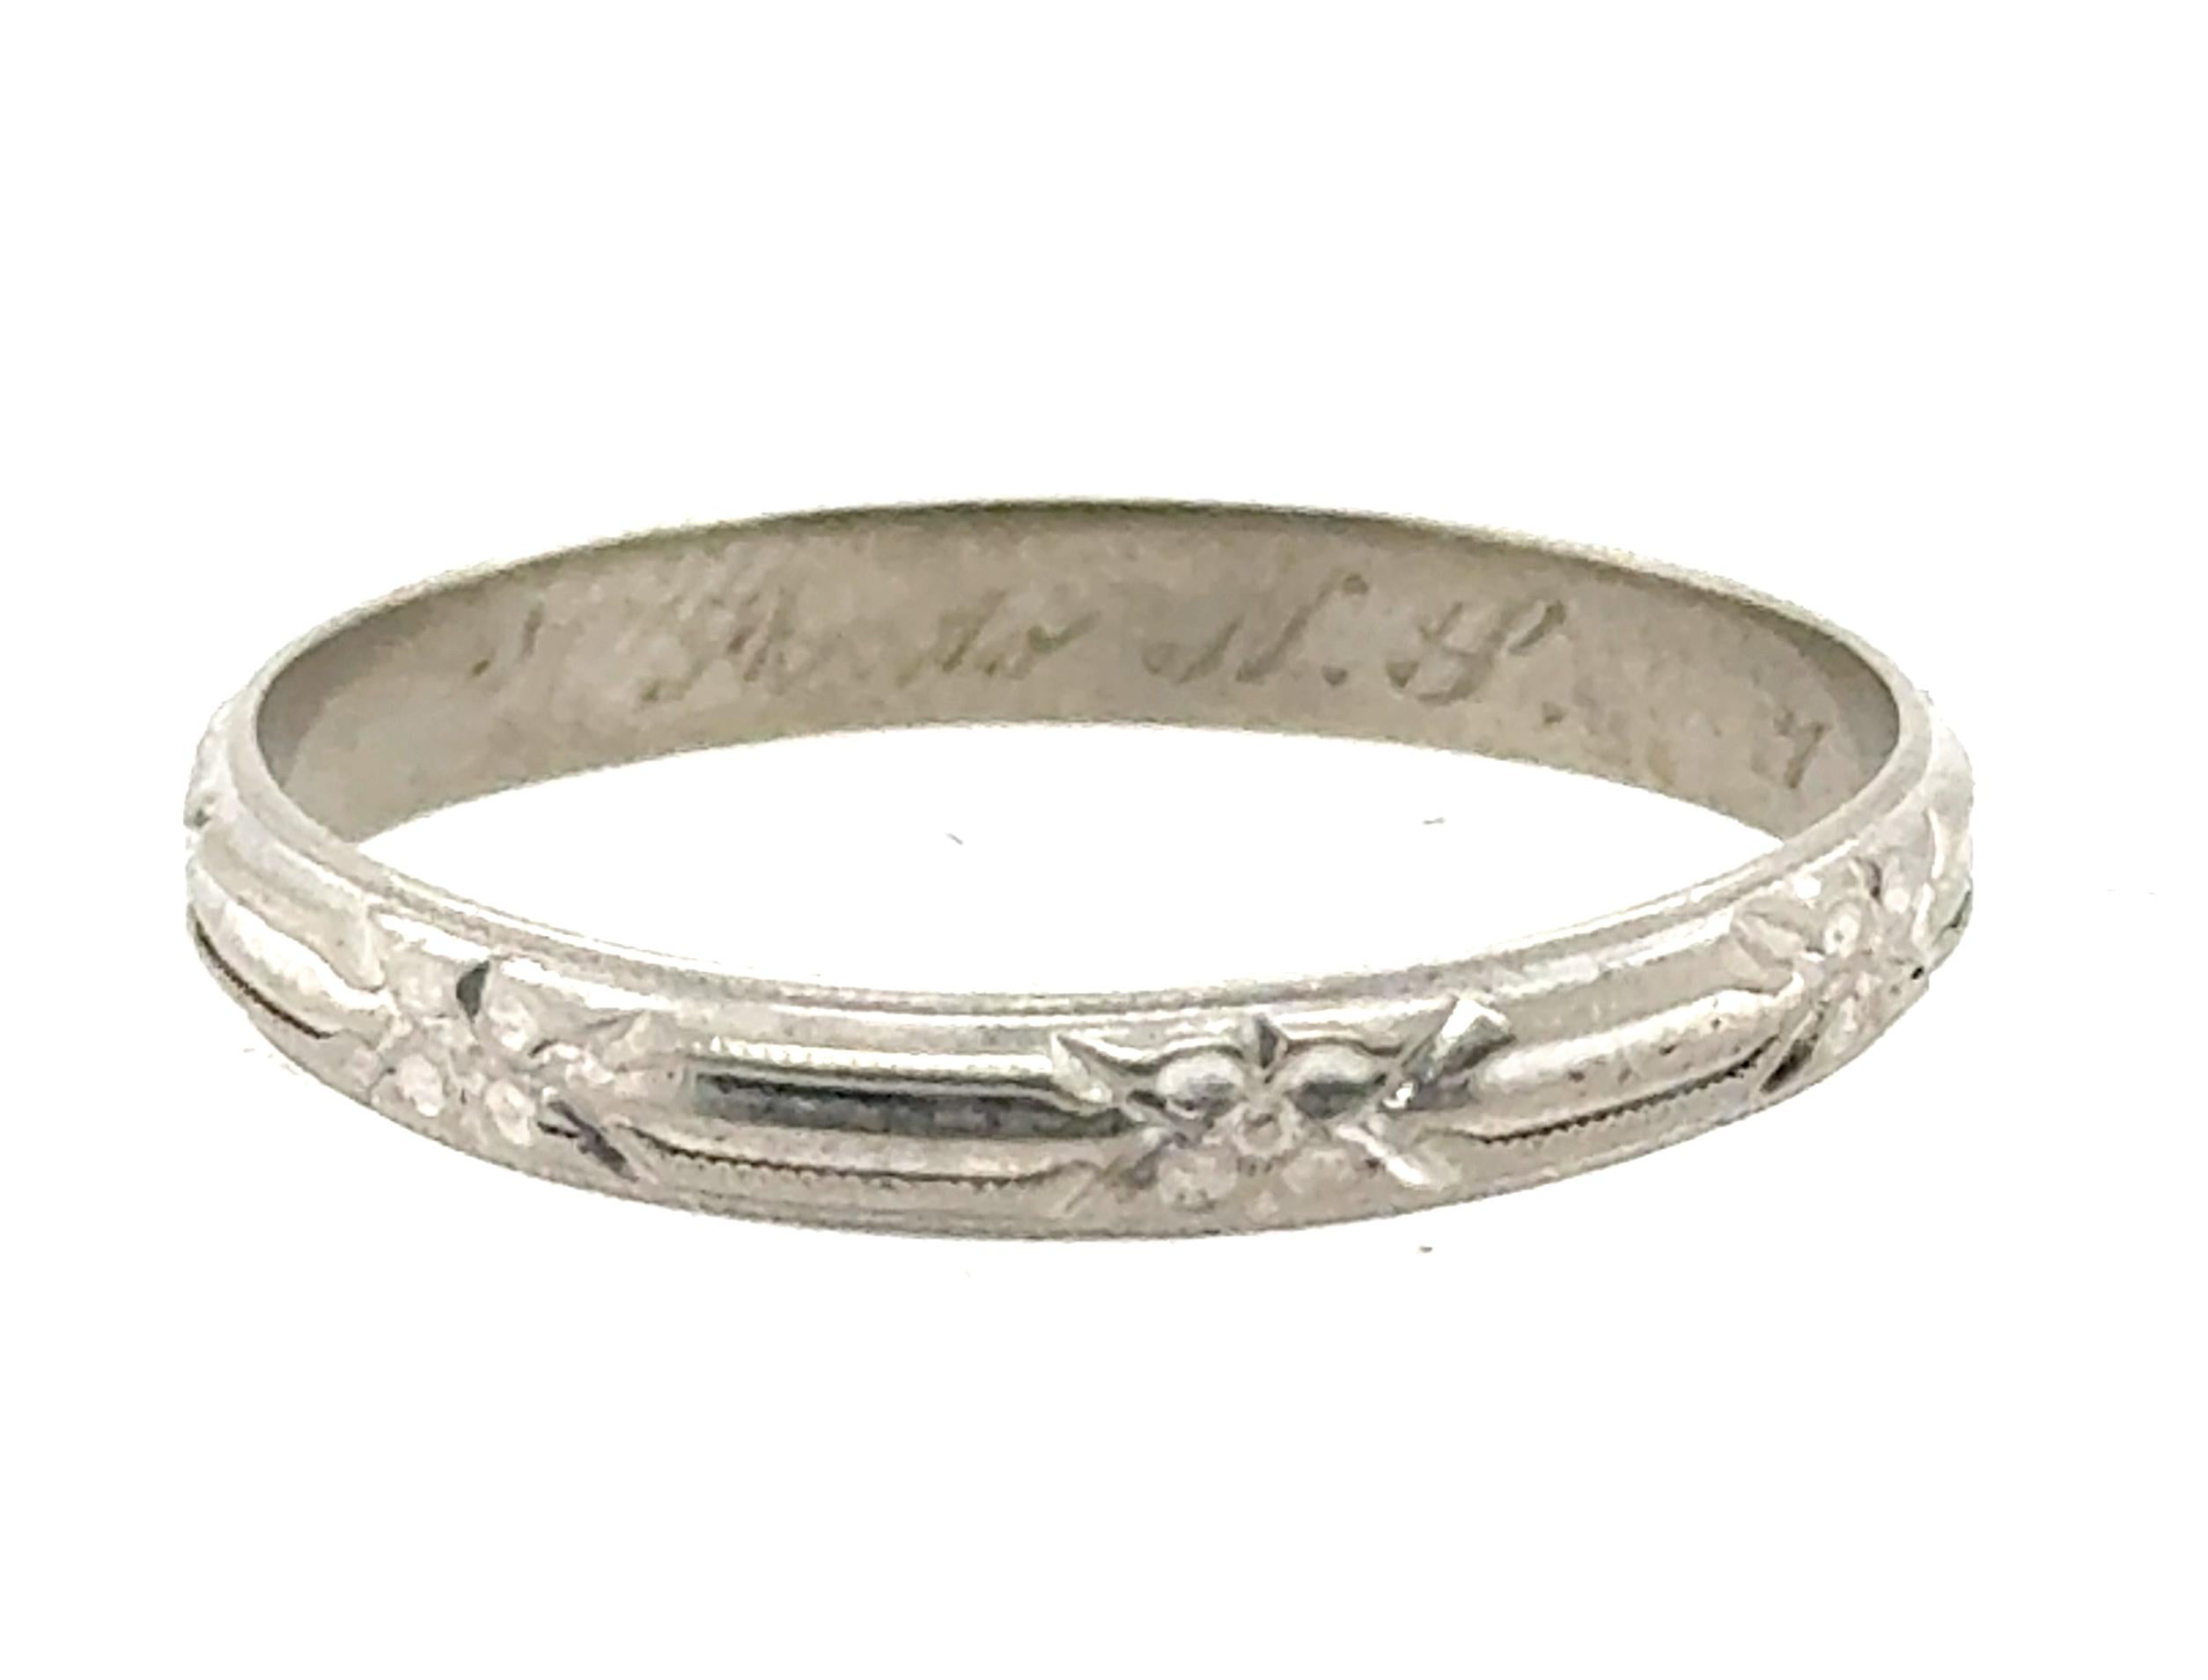 Genuine Original Antique Art Deco from 1935 Vintage White Gold Anniversary Wedding Ring Eternity Band



Features Hand Engraved Flowers Around Entire Piece 

Delicate Milgrain Edges

Hand Engraved Inside Shank 